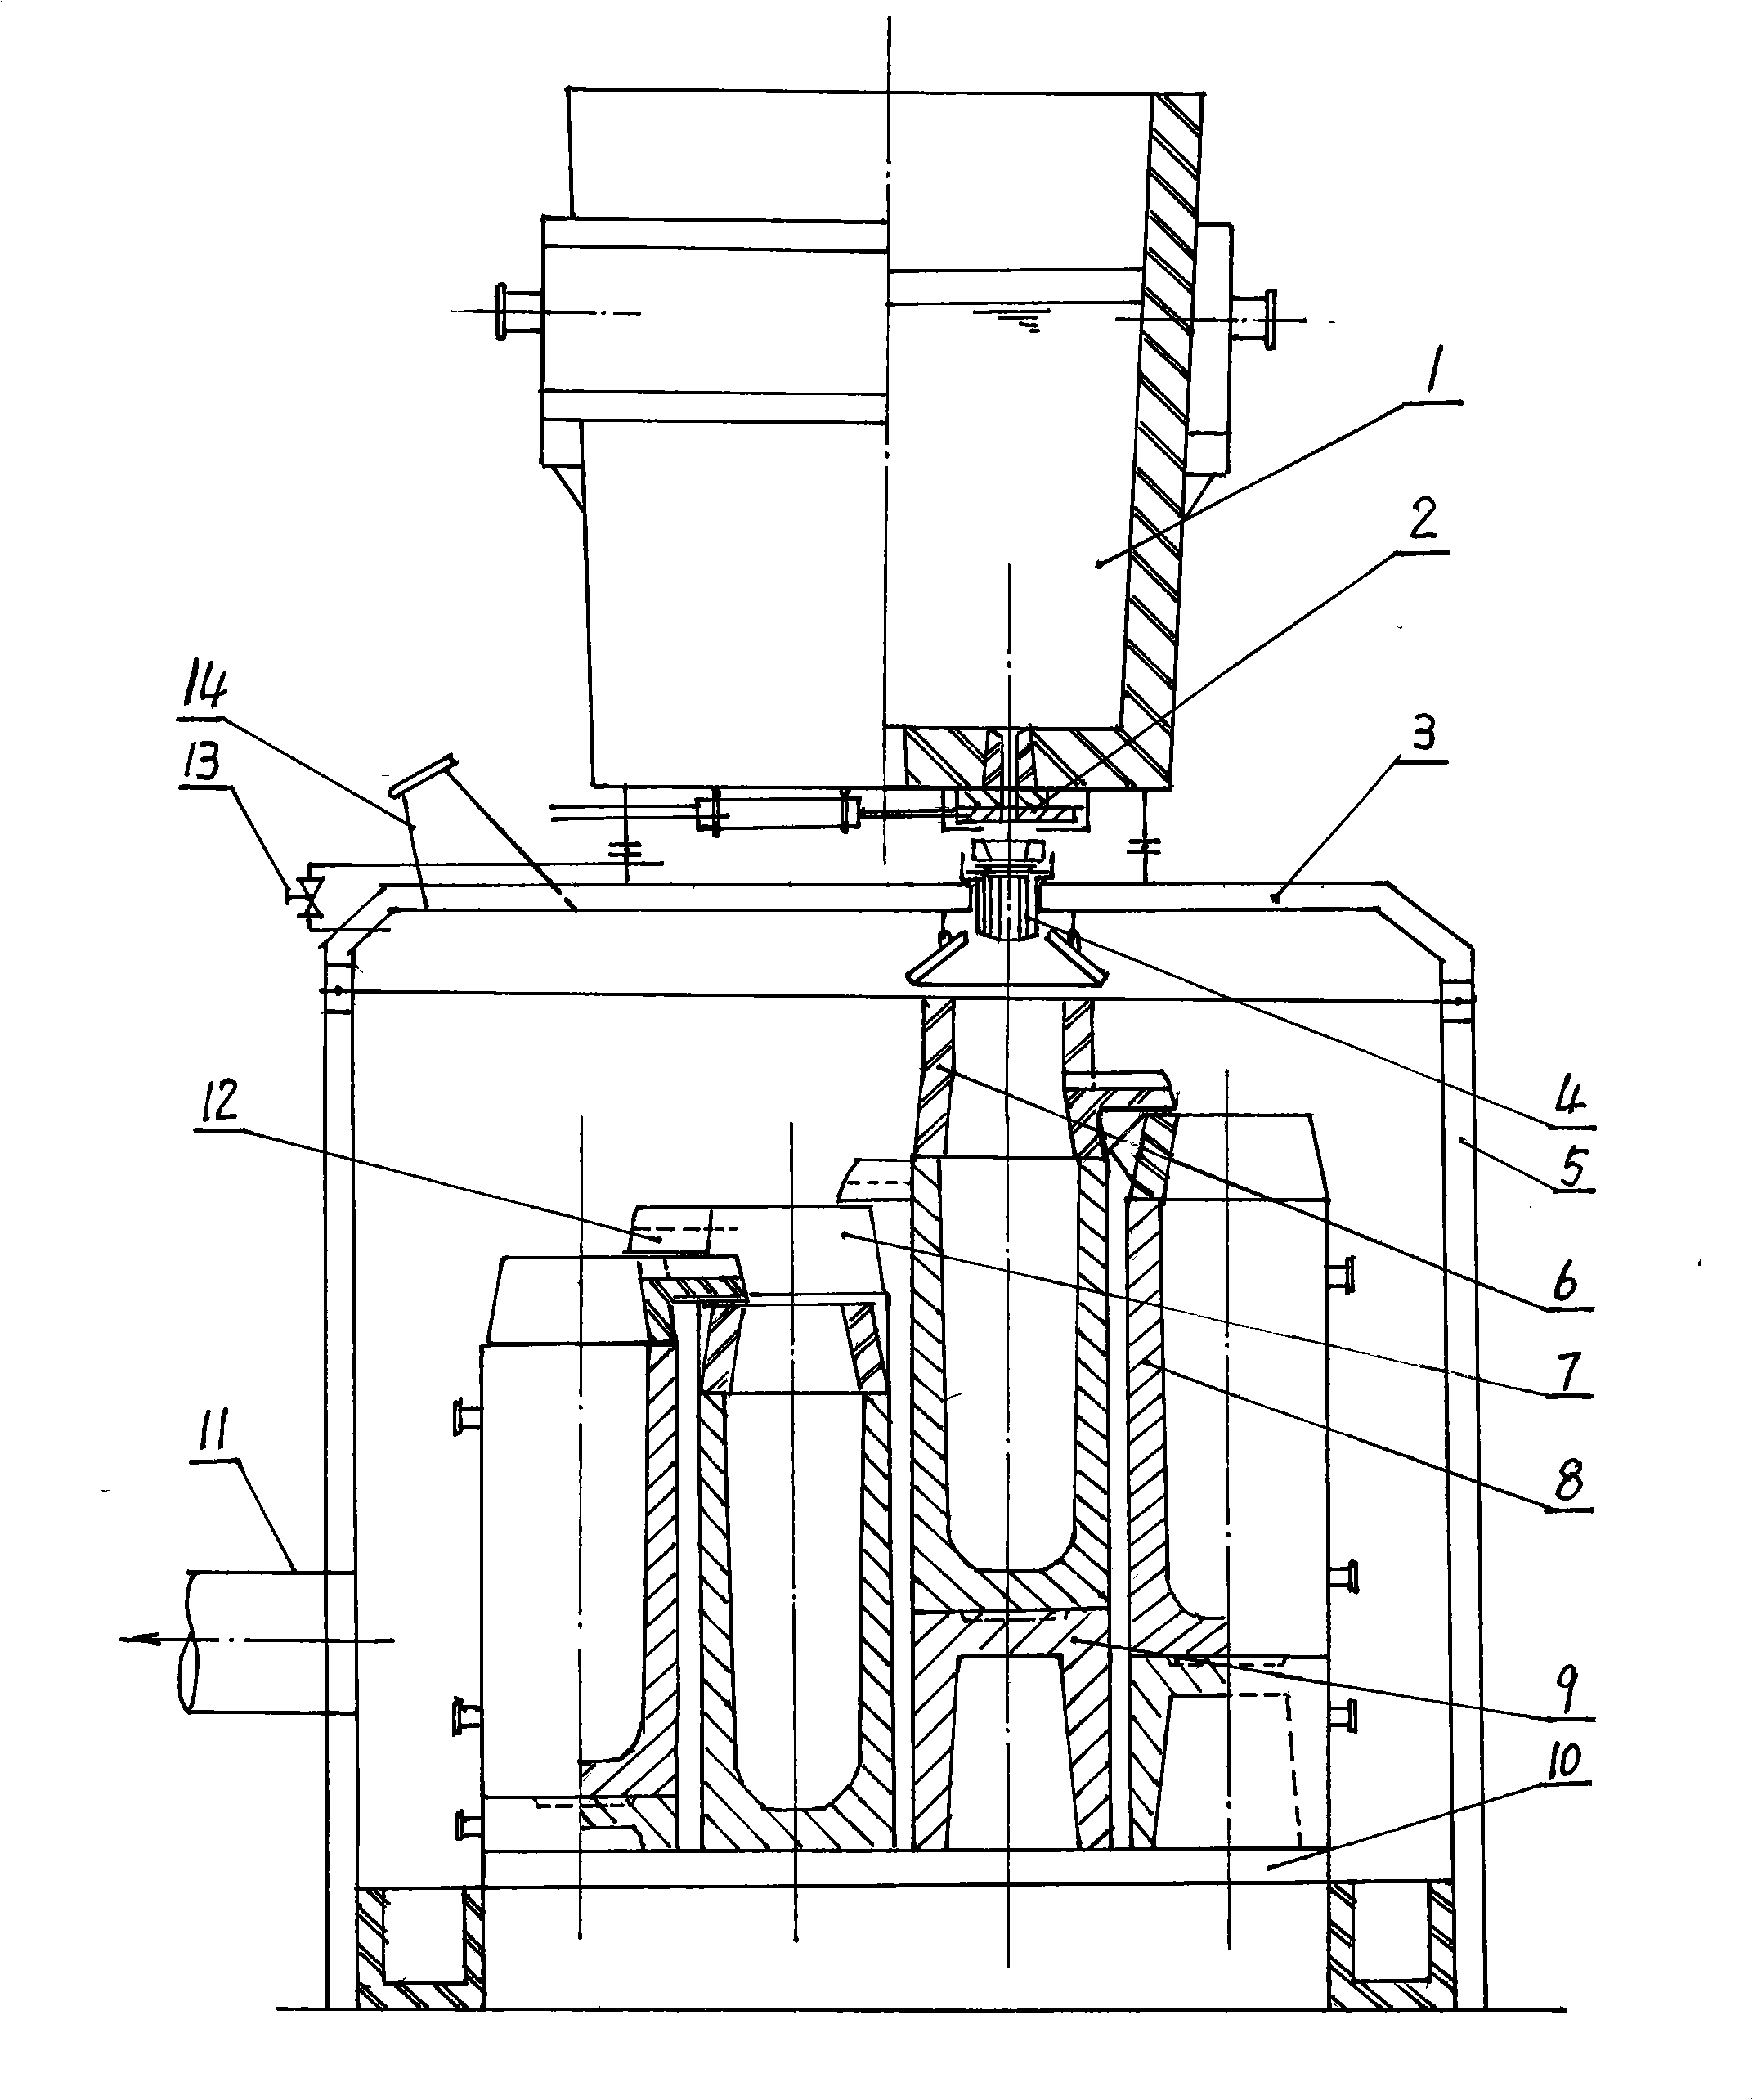 Equipment and process for casting multi-branch steel ingot with vacuum spill method and liquid steel